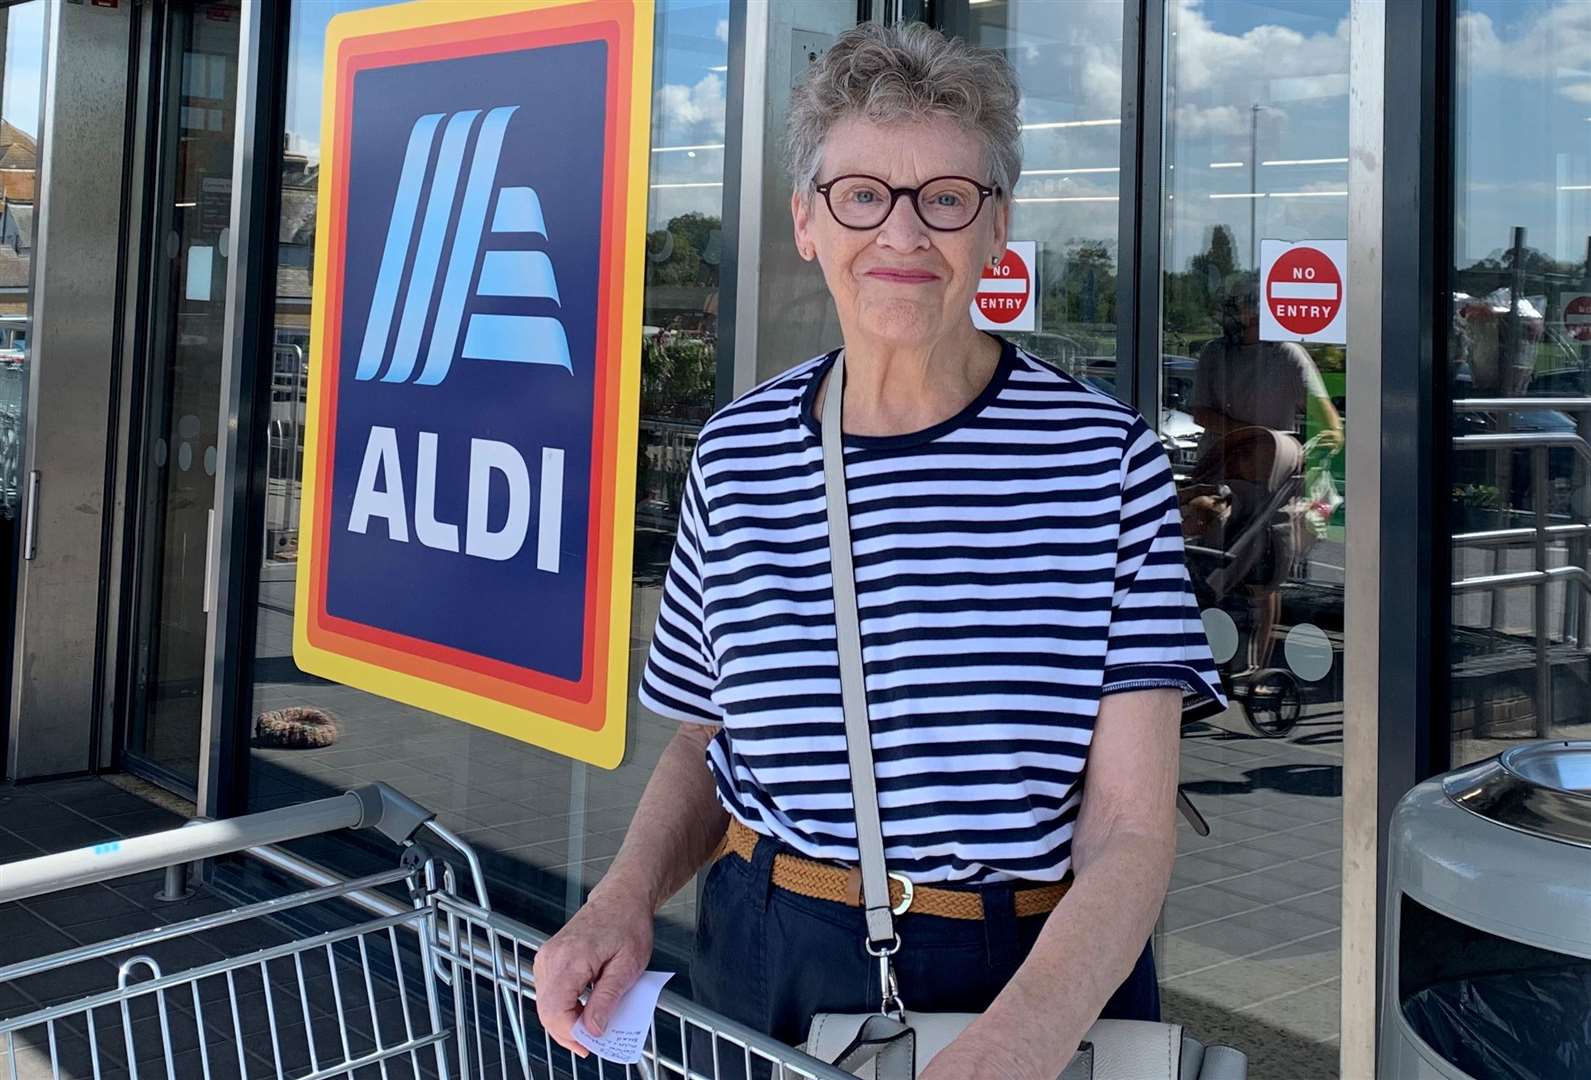 Lesley McDowell, 77, worries some staff at Aldi in Herne Bay could eventually lose their jobs as the chain moves more towards self-service tills